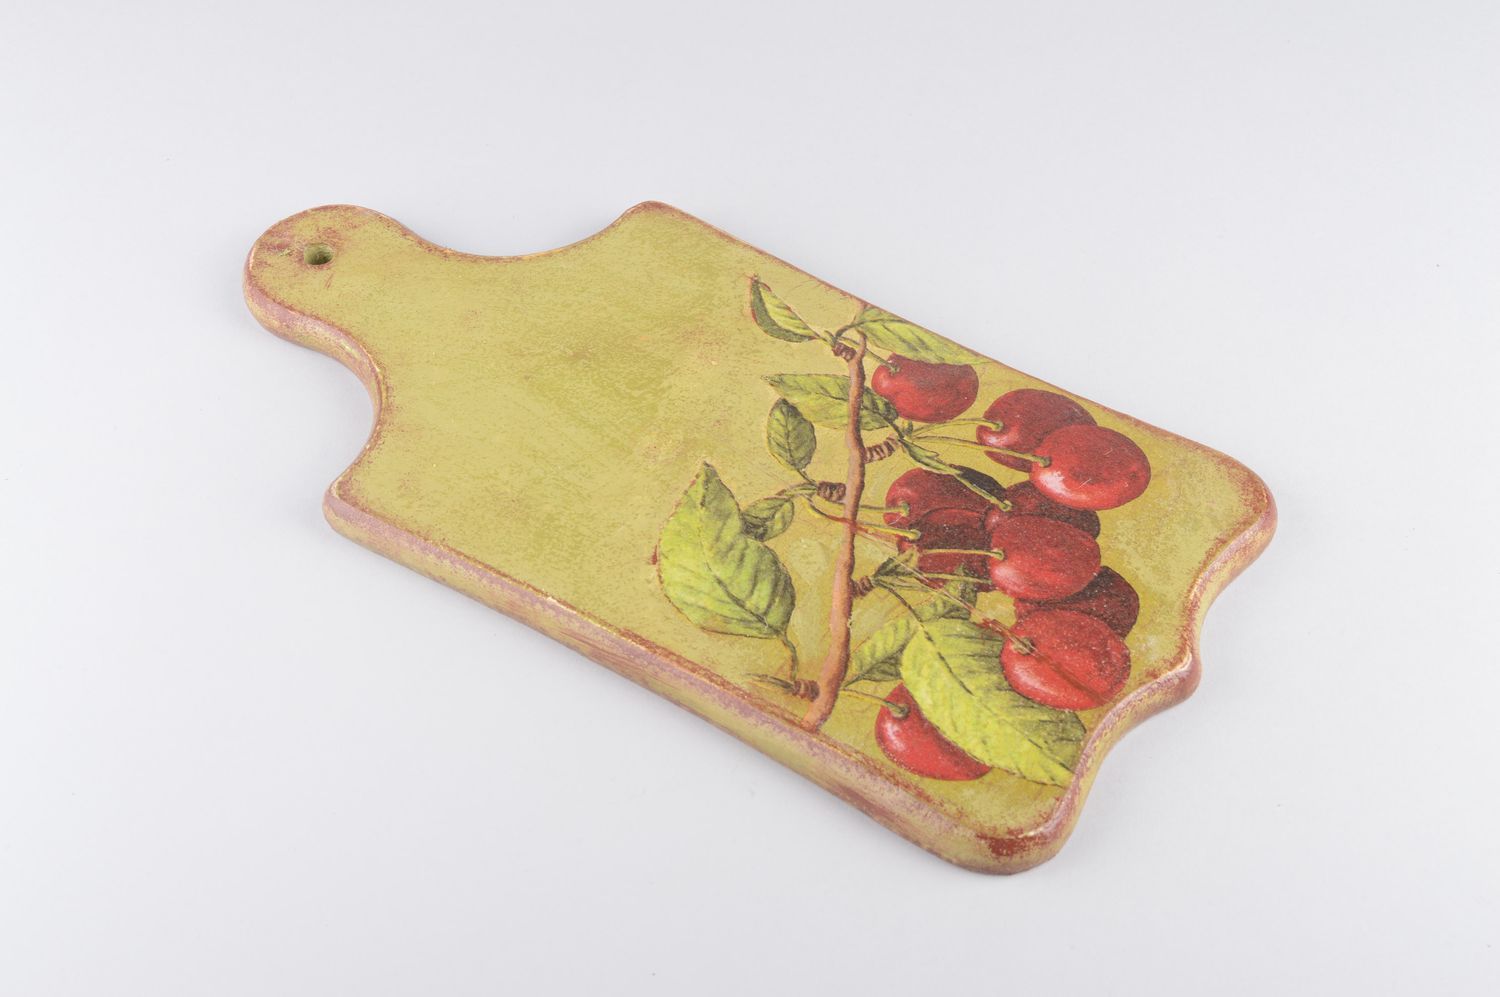 Handmade wooden kitchen board chopping board for decorative use only gift ideas photo 1